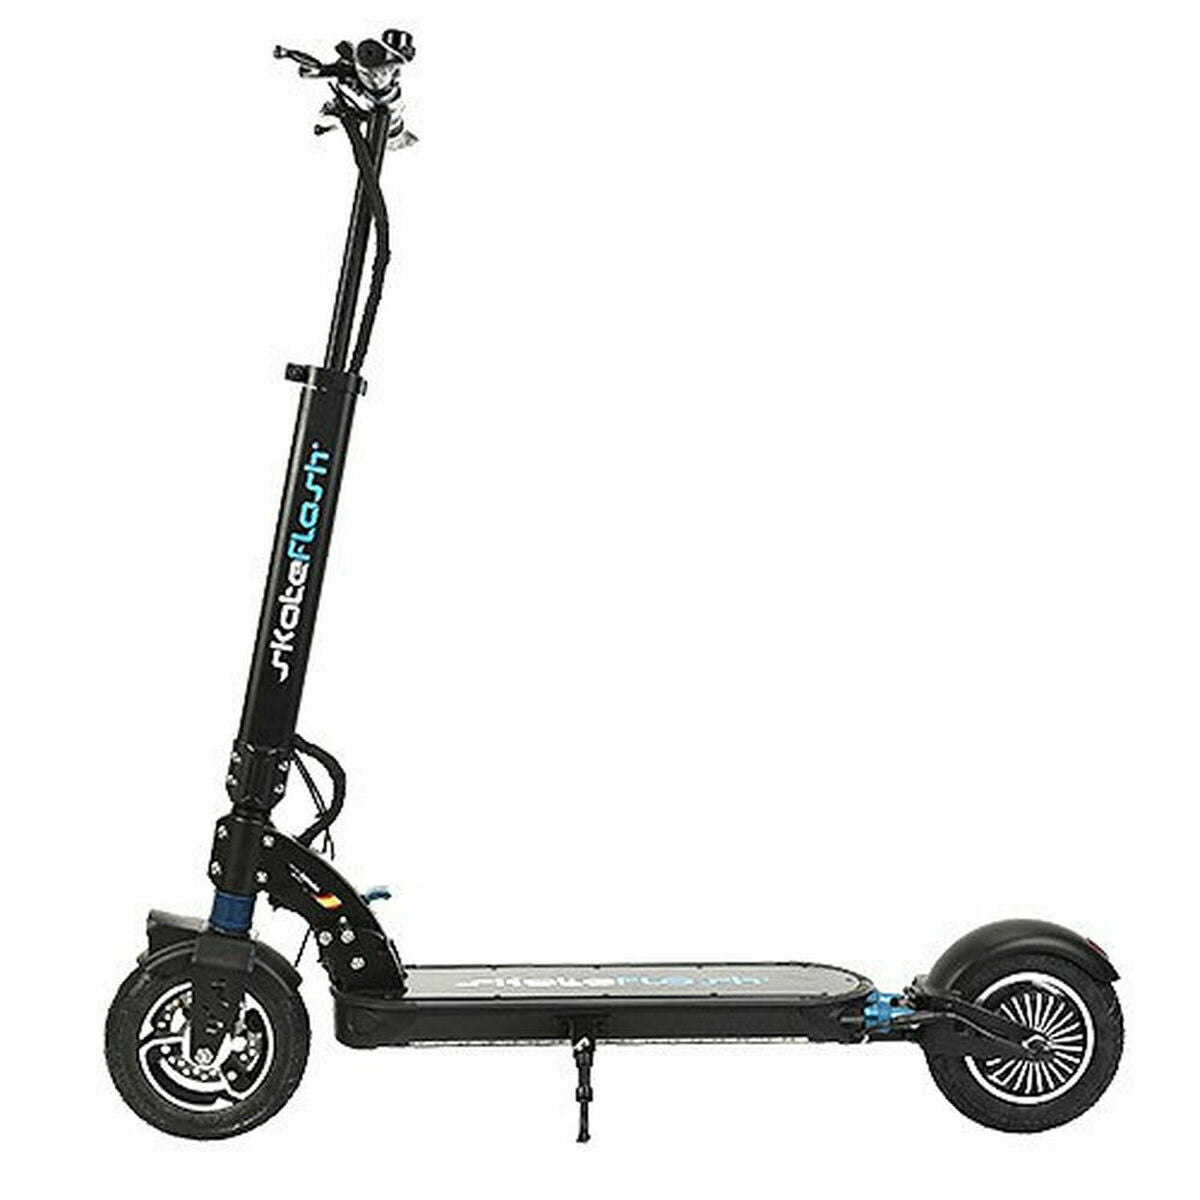 Electric Scooter Skate Flash AVANTSEE 600W, Skate Flash, Sports and outdoors, Urban mobility, electric-scooter-skate-flash-avantsee-600w, Brand_Skate Flash, category-reference-2609, category-reference-2629, category-reference-2904, category-reference-t-19681, category-reference-t-19756, category-reference-t-19876, category-reference-t-21245, Condition_NEW, deportista / en forma, Price_600 - 700, RiotNook